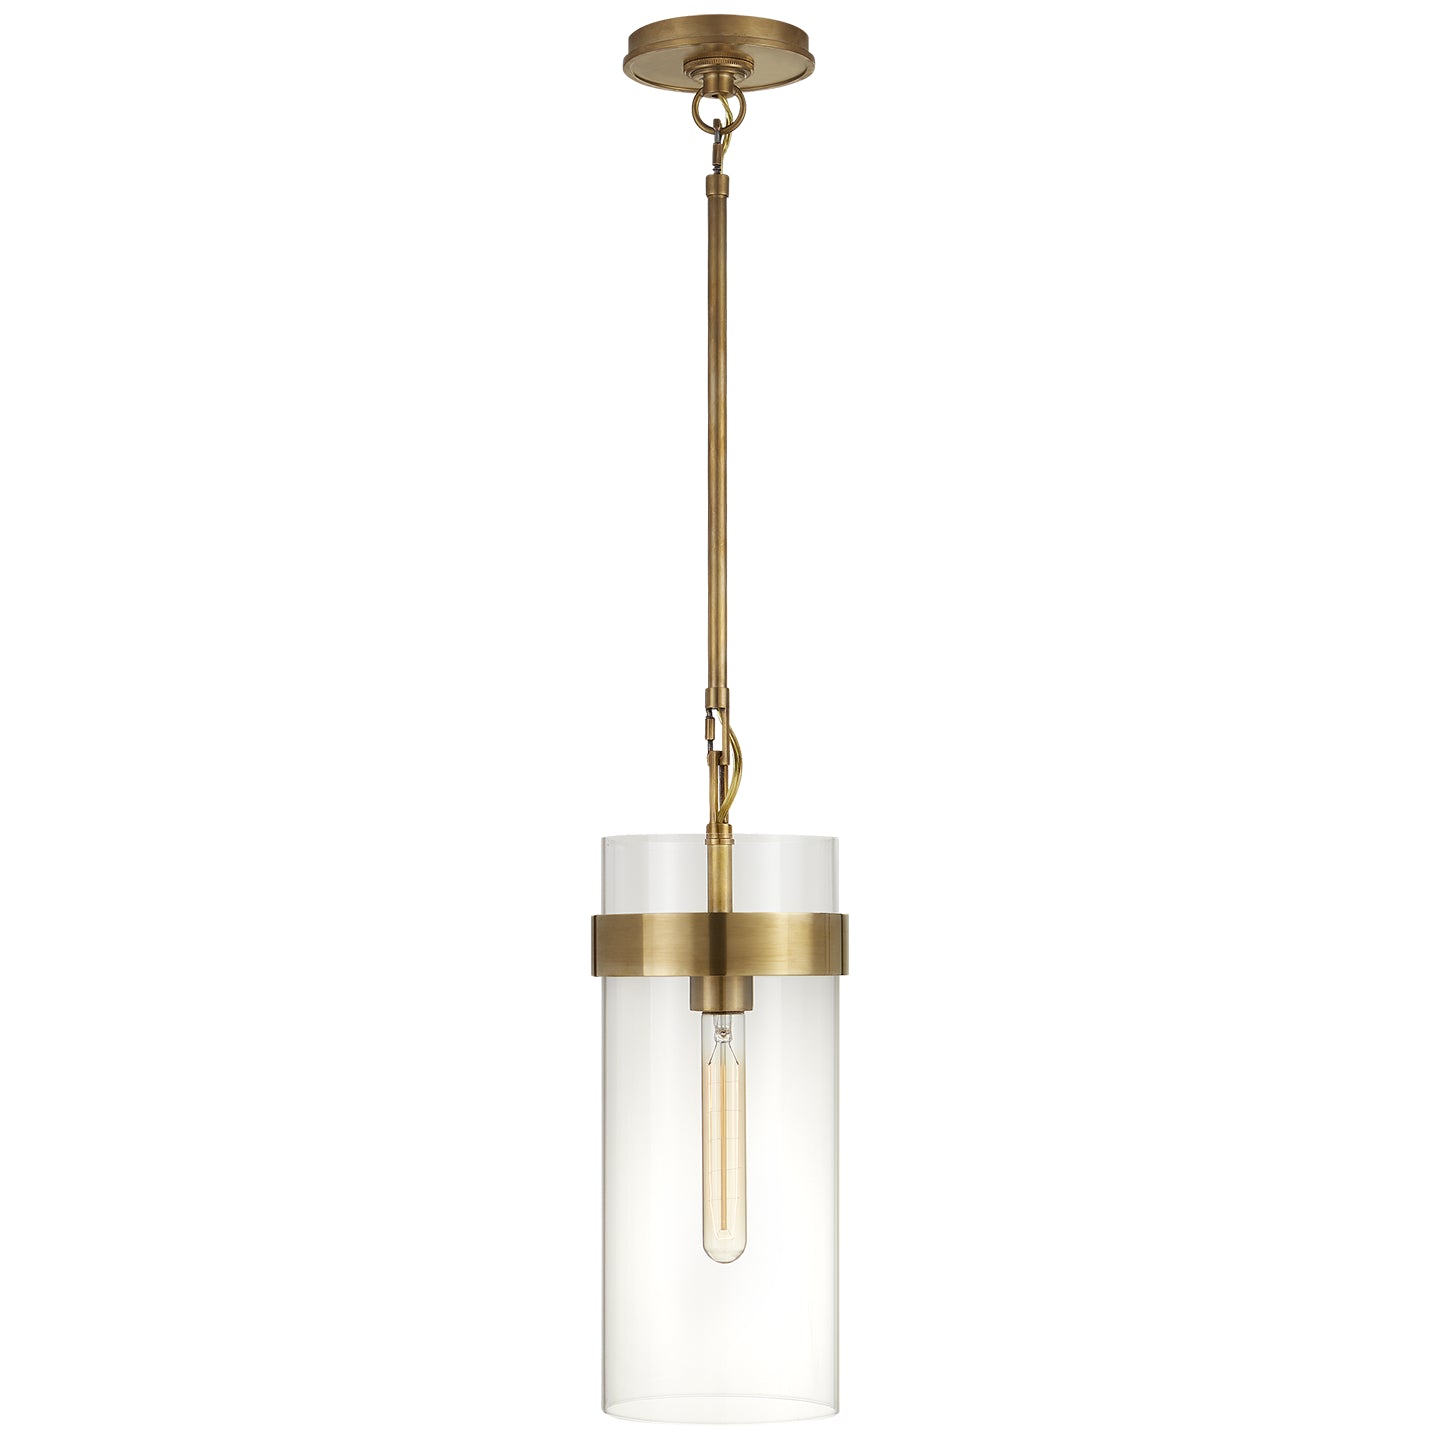 Load image into Gallery viewer, Visual Comfort Signature - S 5673HAB-CG - One Light Pendant - Presidio - Hand-Rubbed Antique Brass
